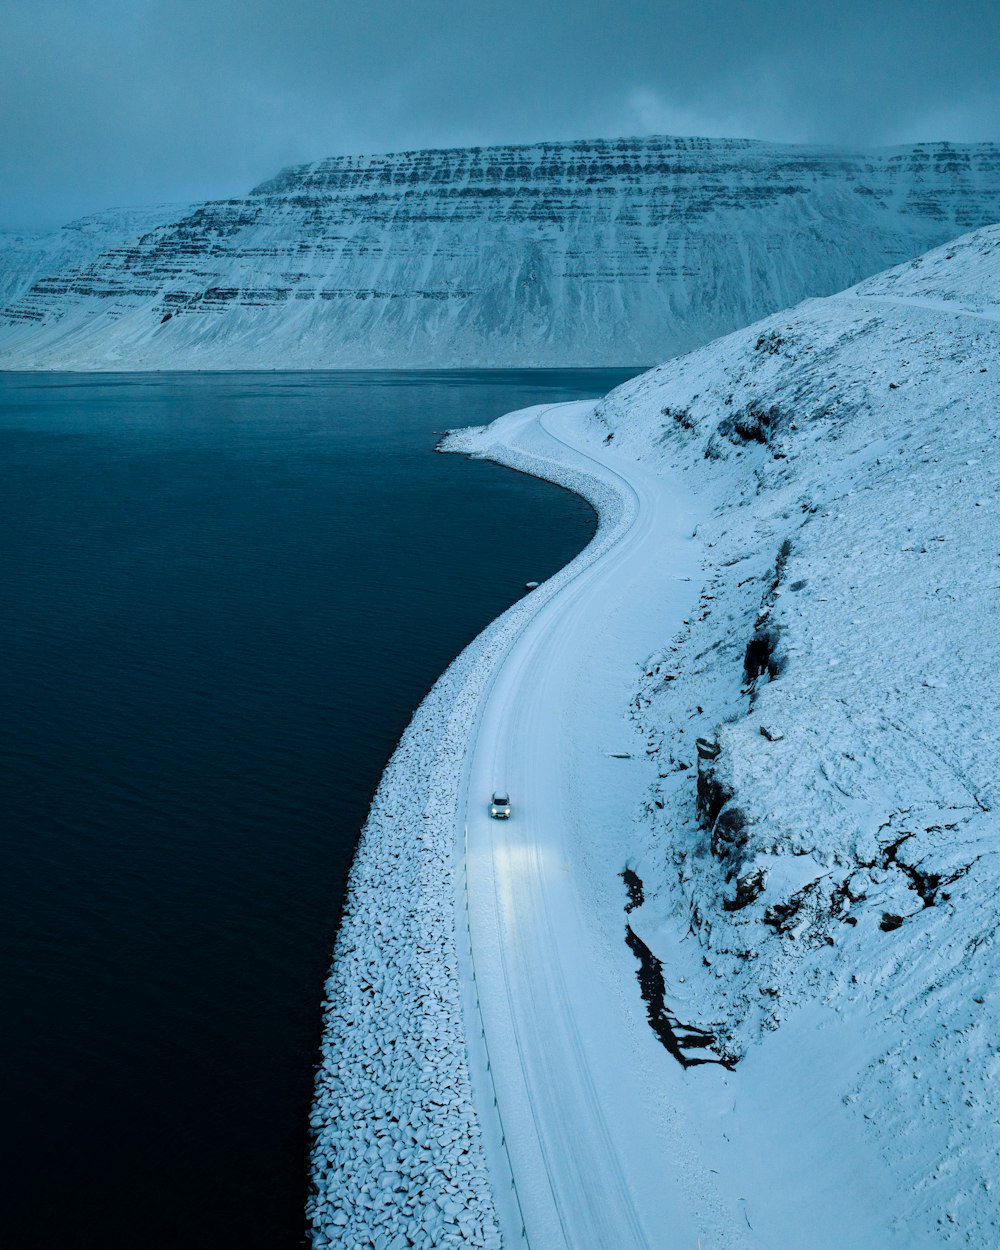 a snow covered hill next to a body of water